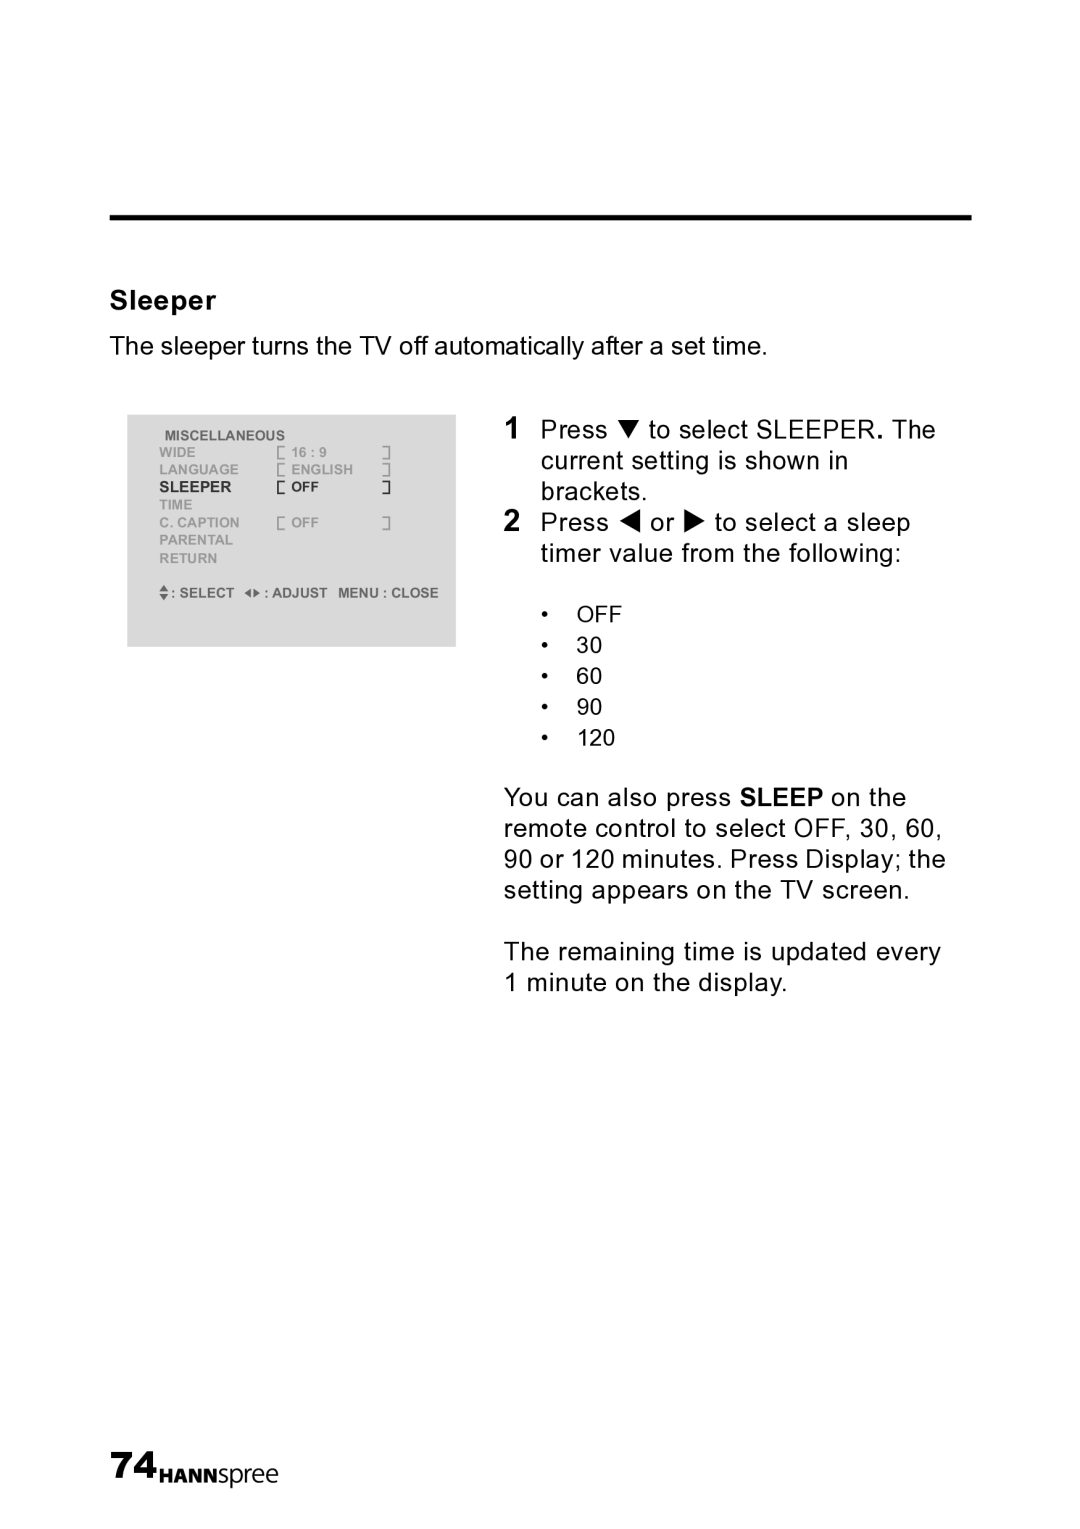 HANNspree LT12-23U1-000 user manual Sleeper turns the TV off automatically after a set time 